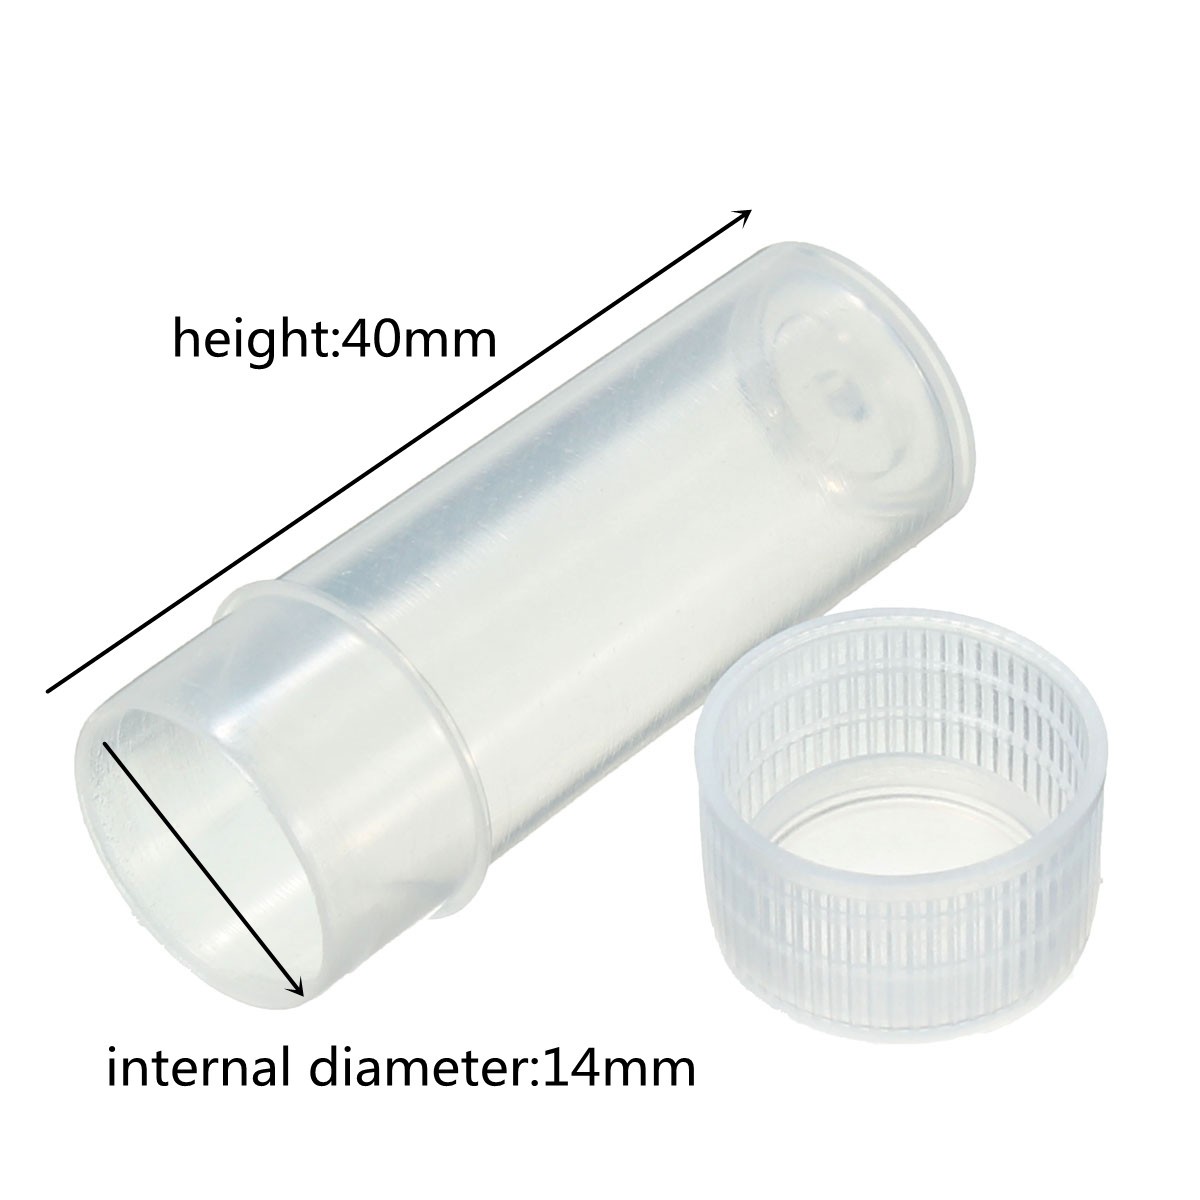 20Pcs 5ml Chemistry Plastic Test Tube Vials with Seal Caps Pack Container